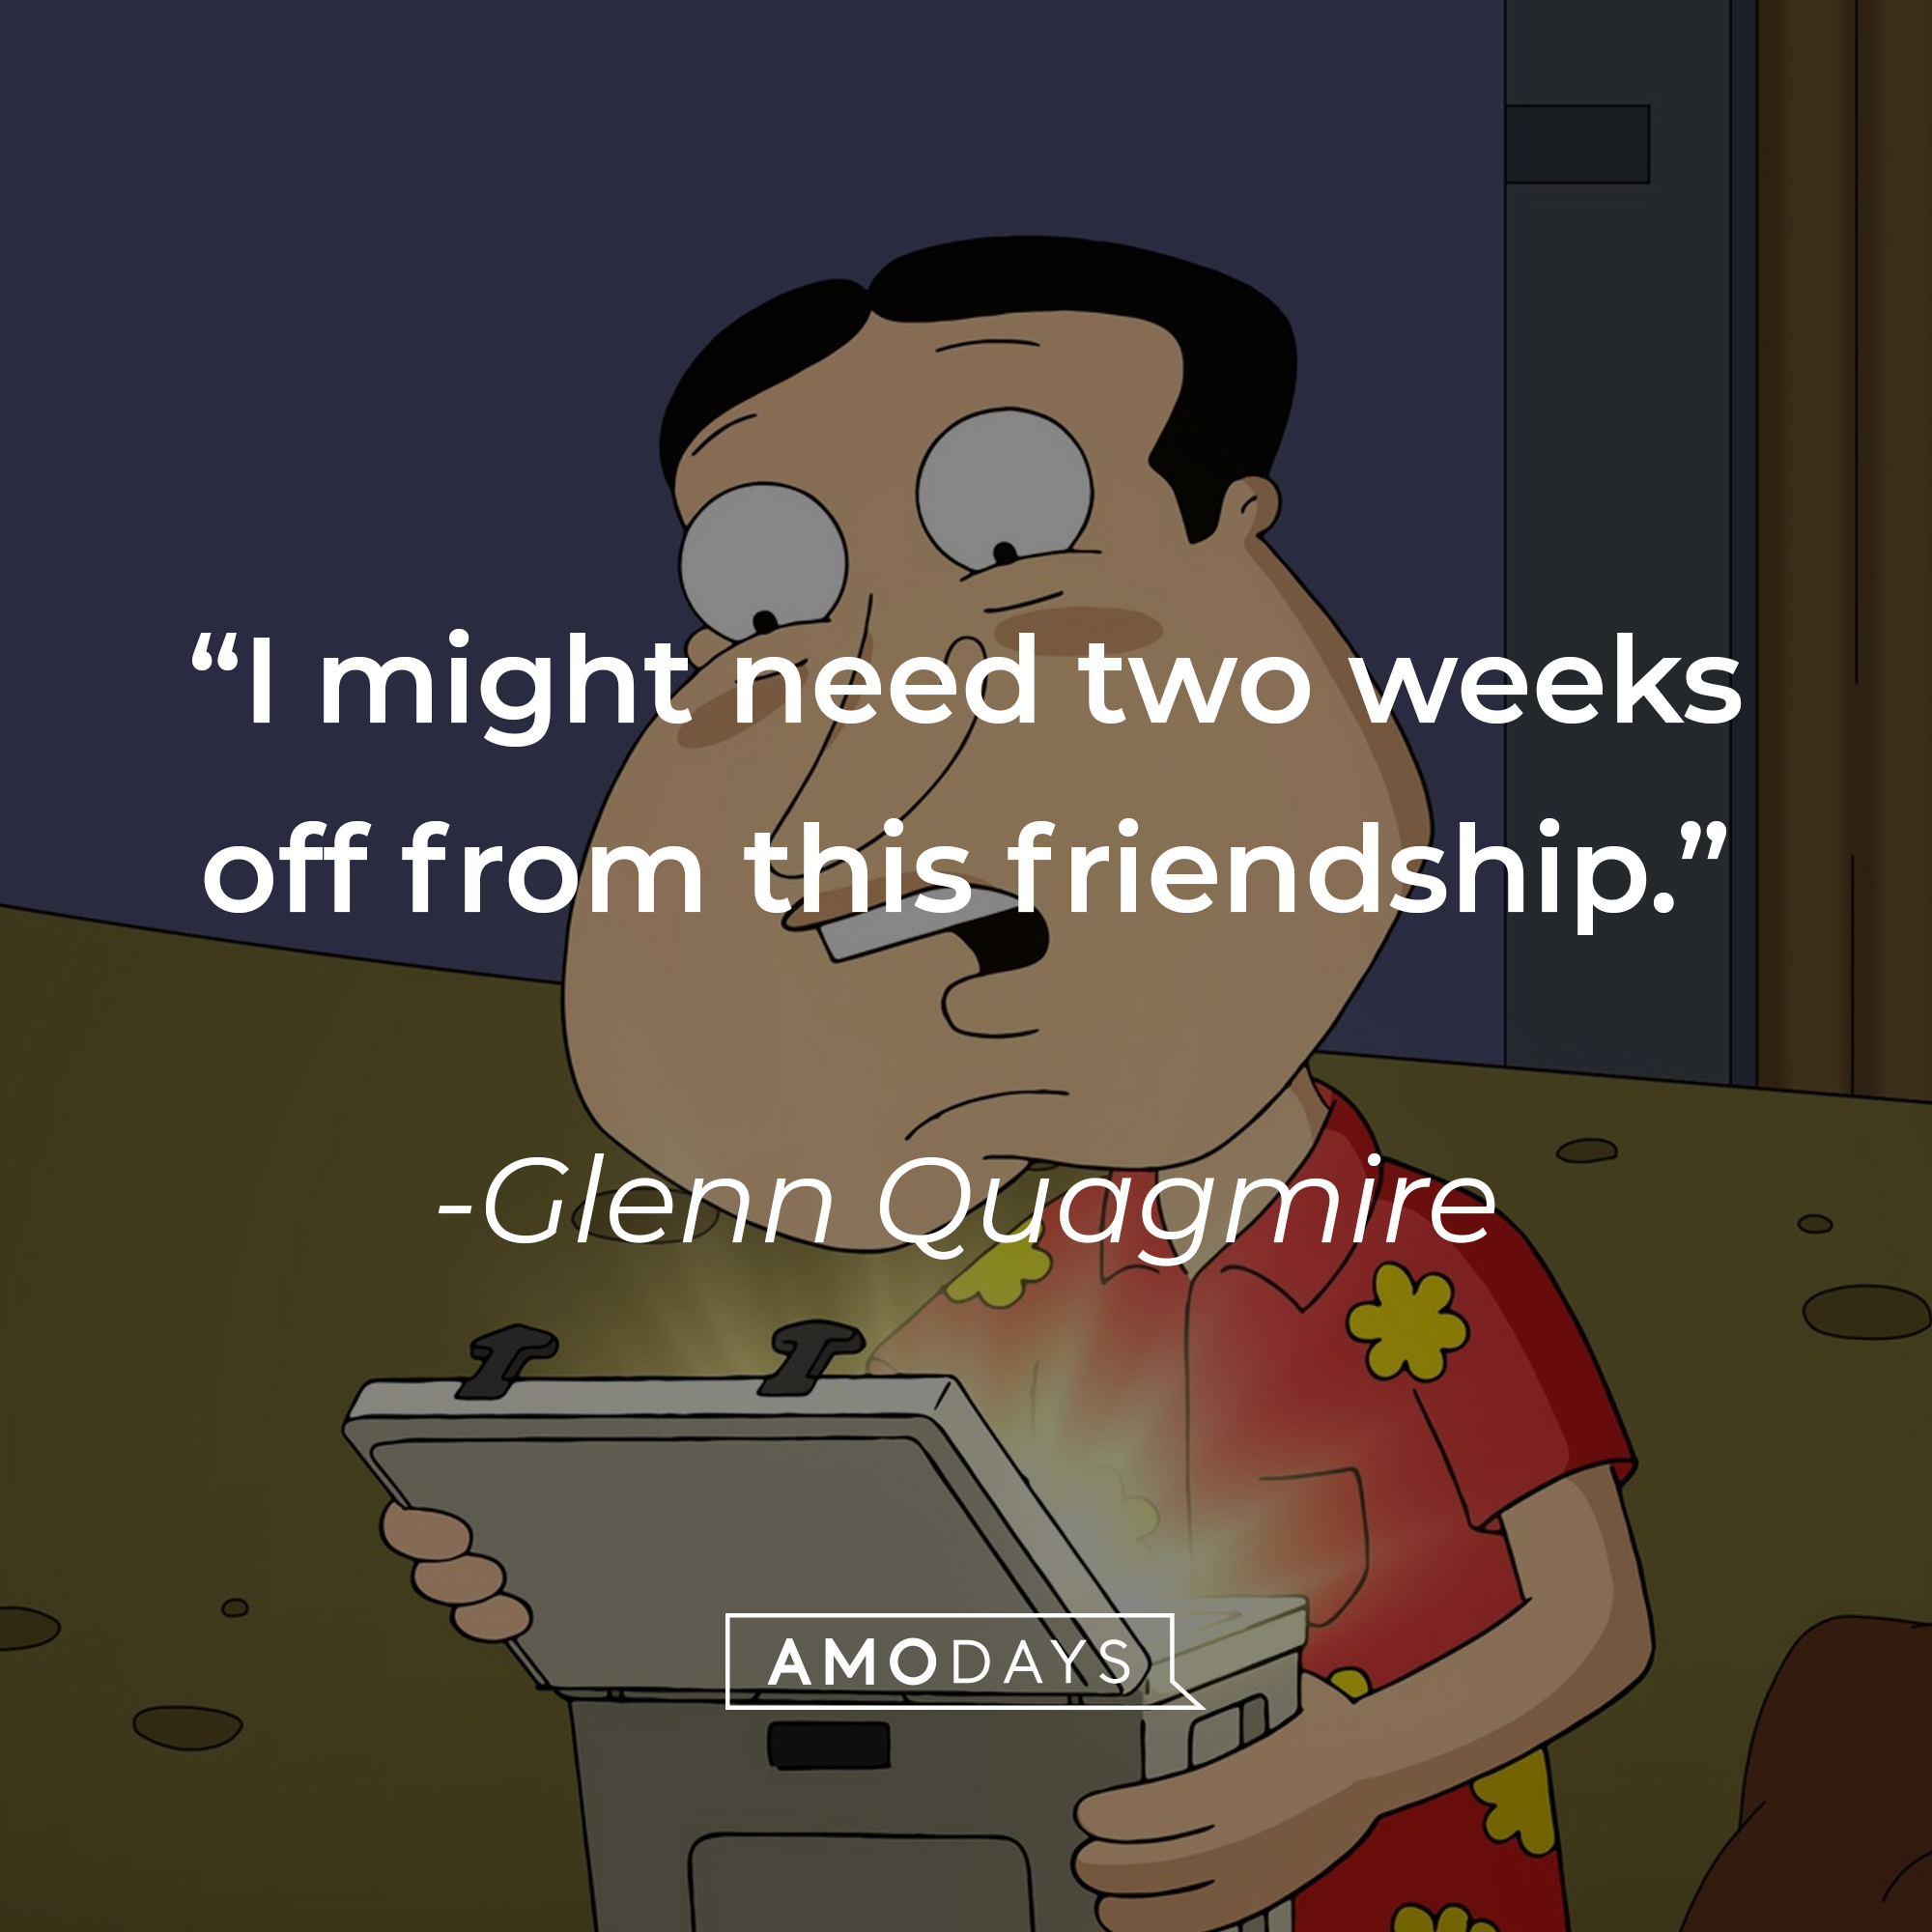 Glenn Quagmire with his quote: “I might need two weeks off from this friendship.” | Source: facebook.com/FamilyGuy